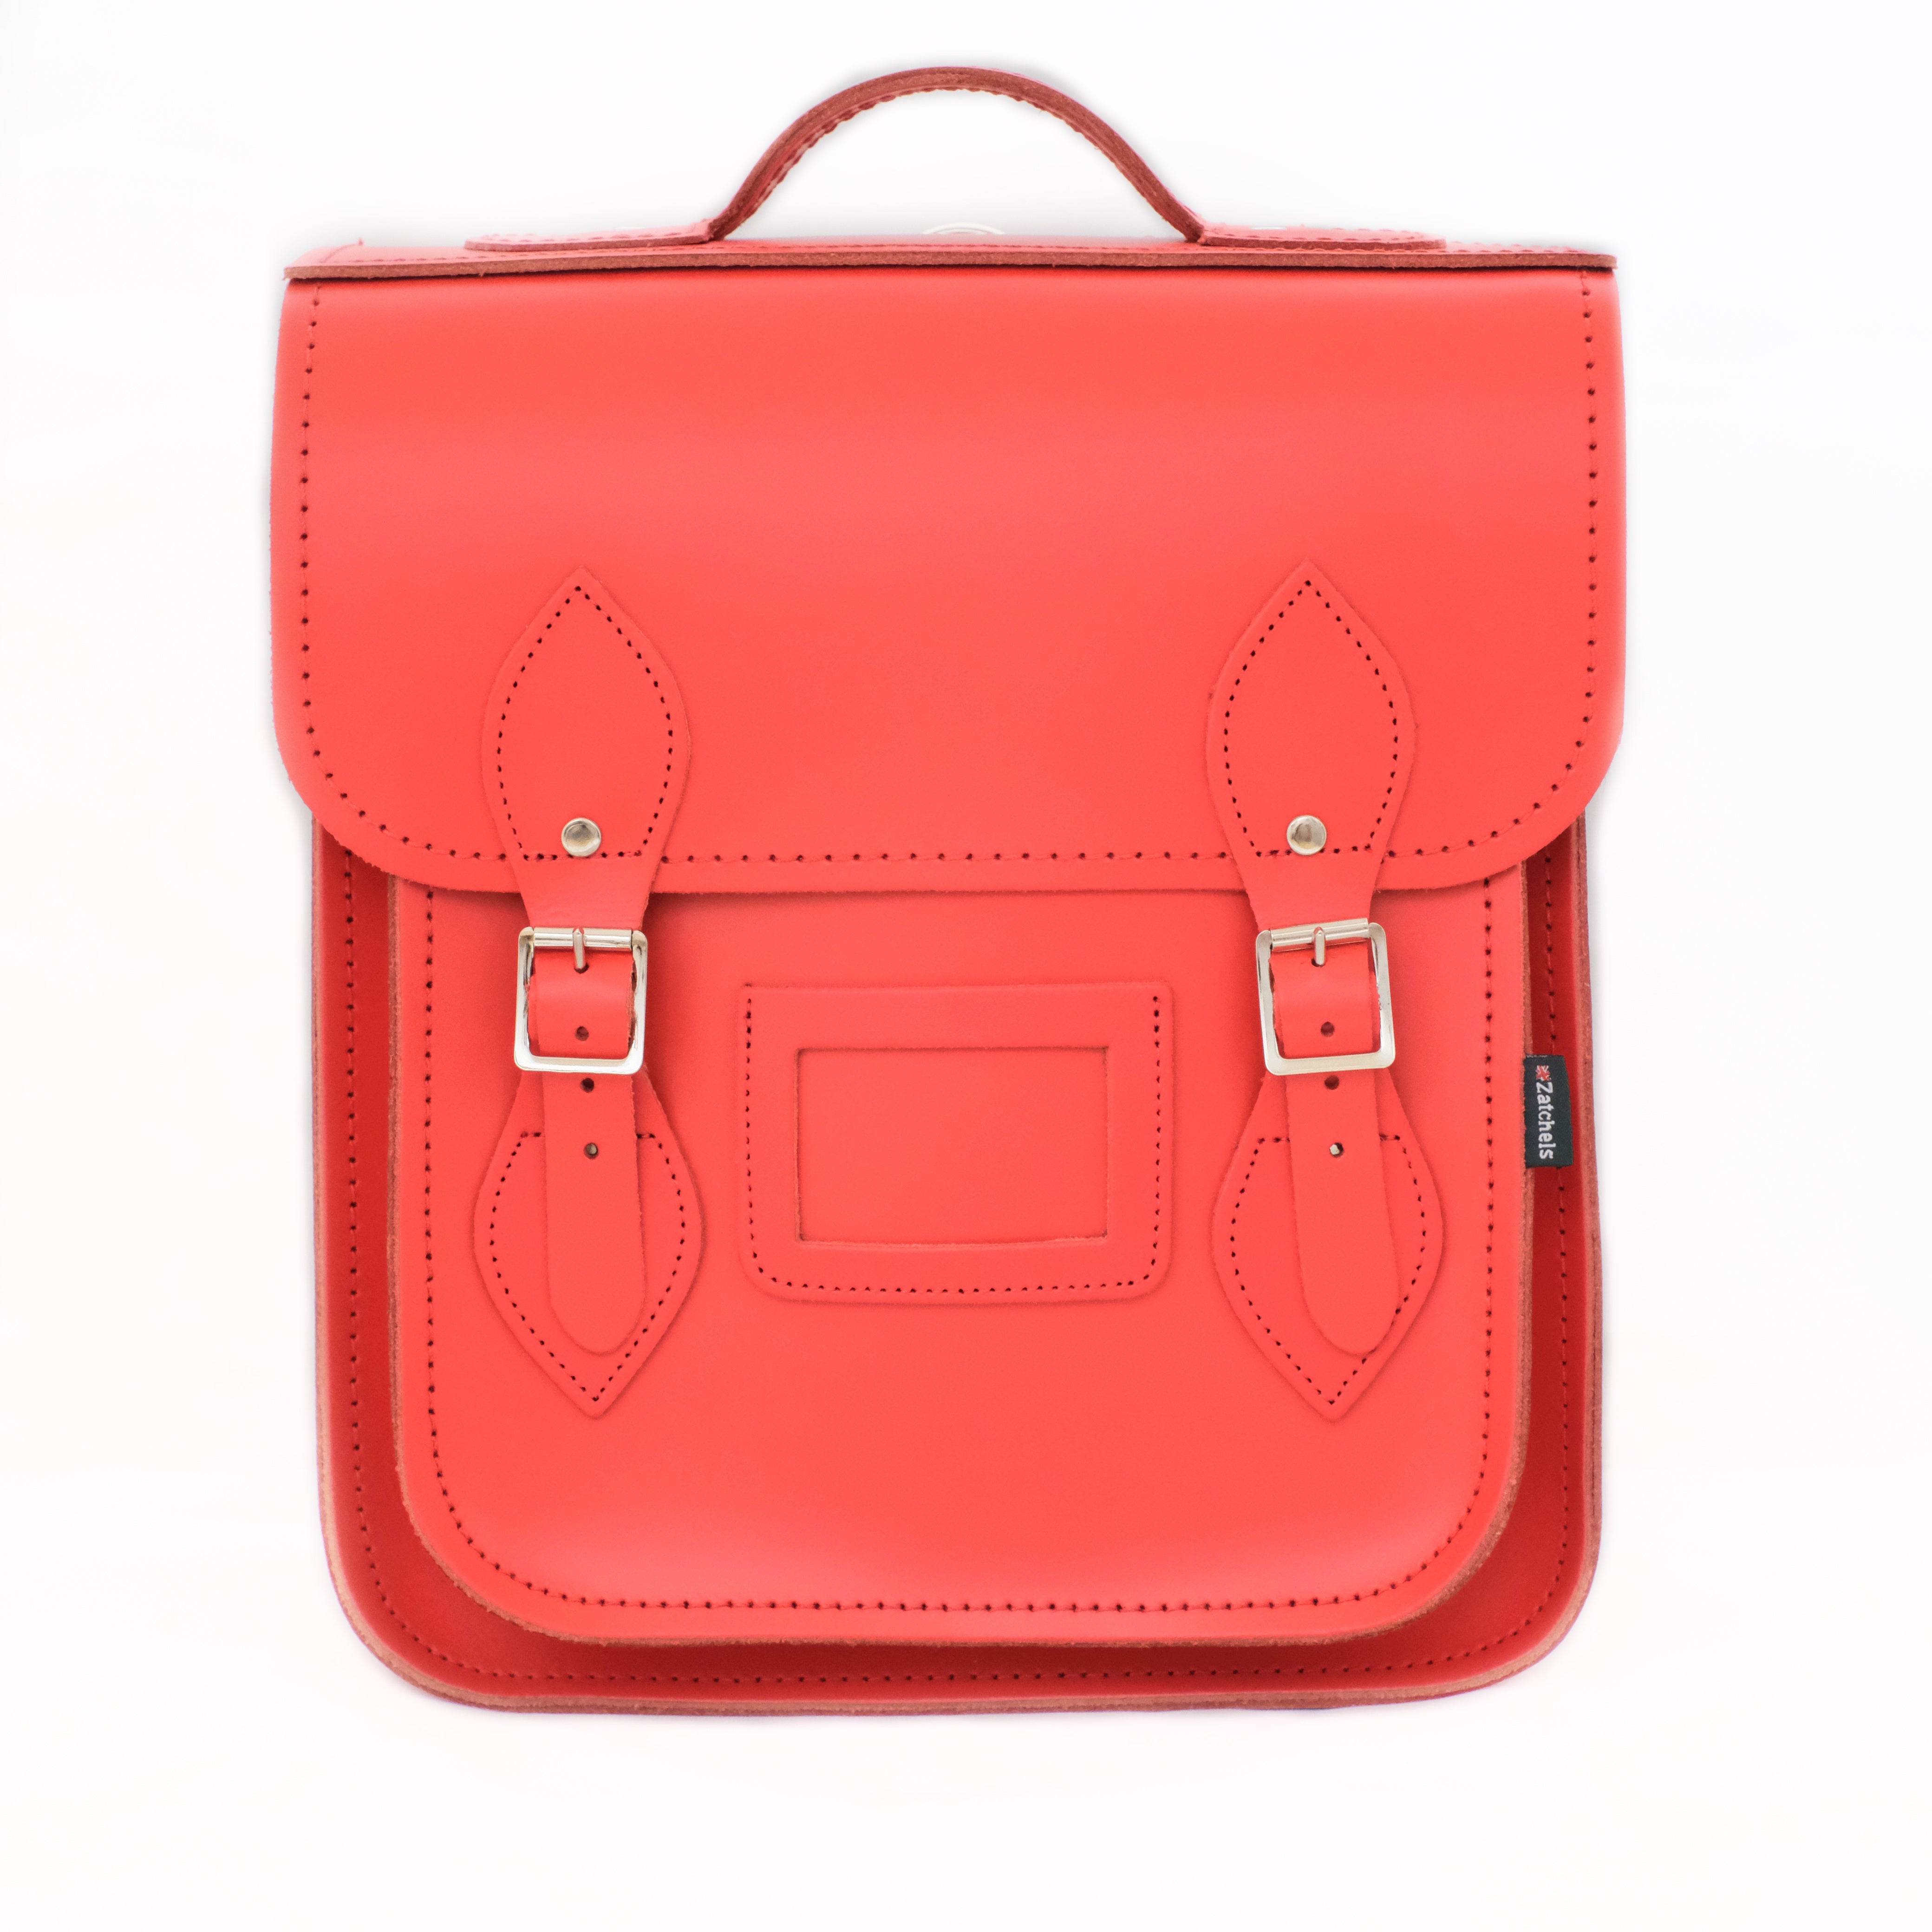 Handmade Leather City Backpack - Pillar Box Red - Small